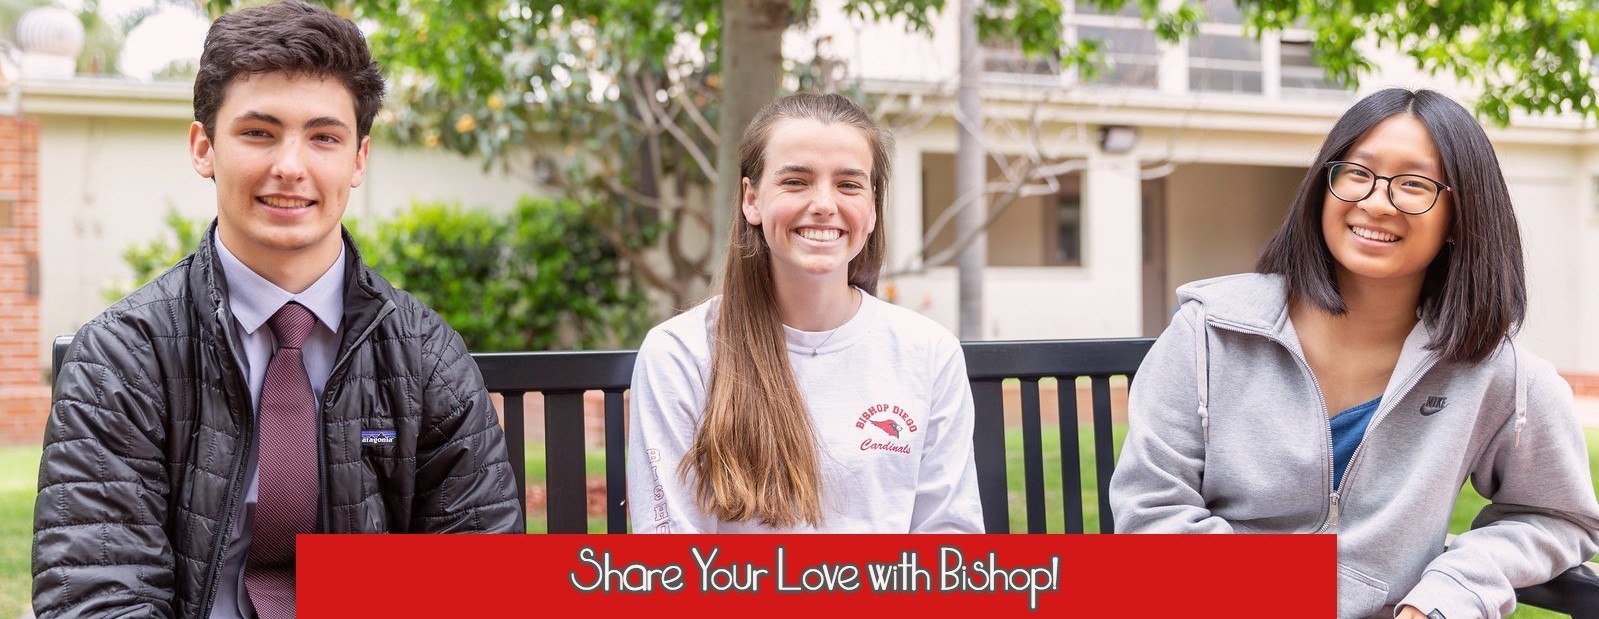 Share Your Love With Bishop